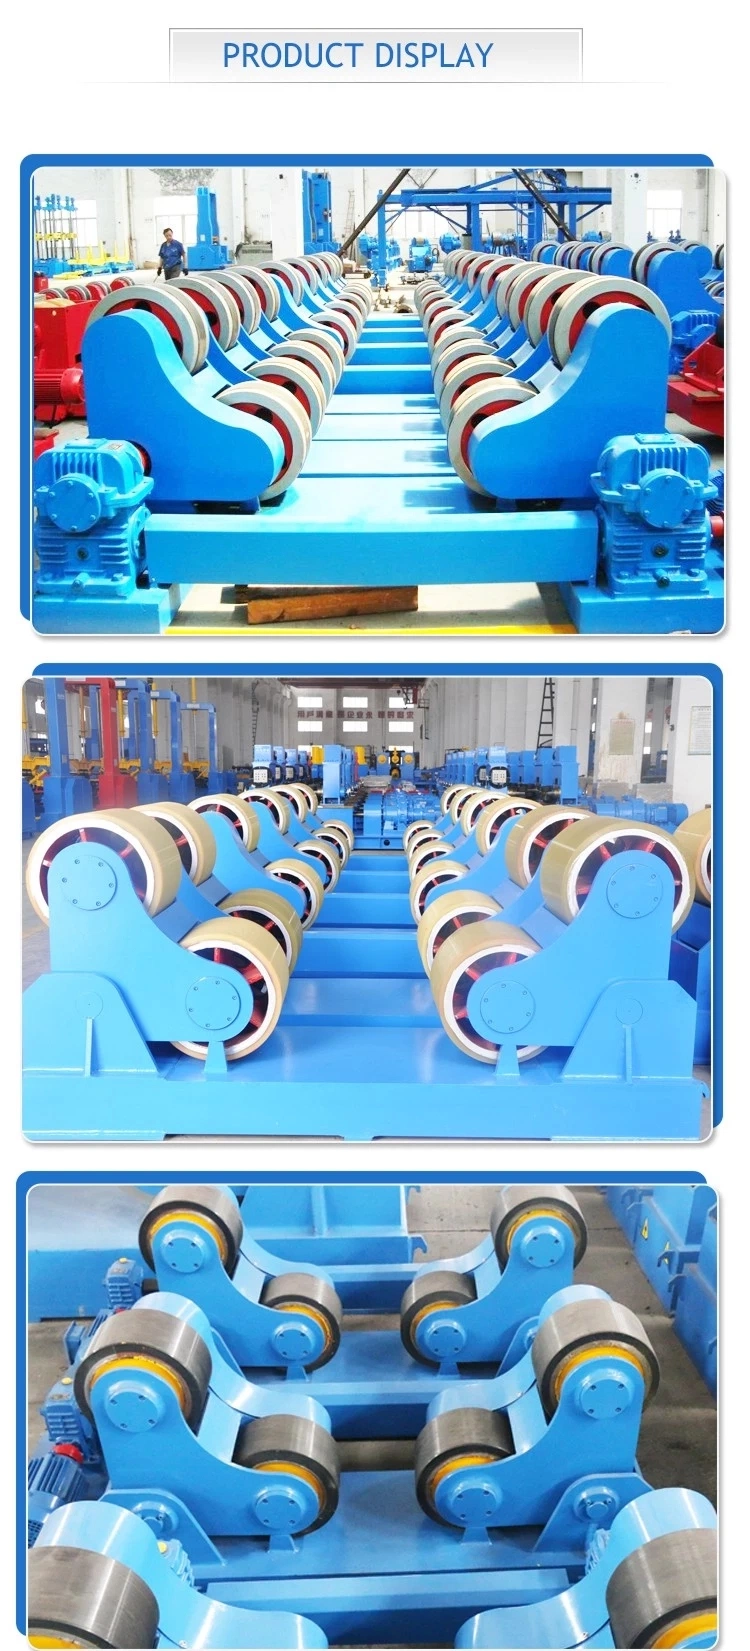 Welding Rotator Turning Roll for Metal Structures Tank Vessel Pipe Assembly